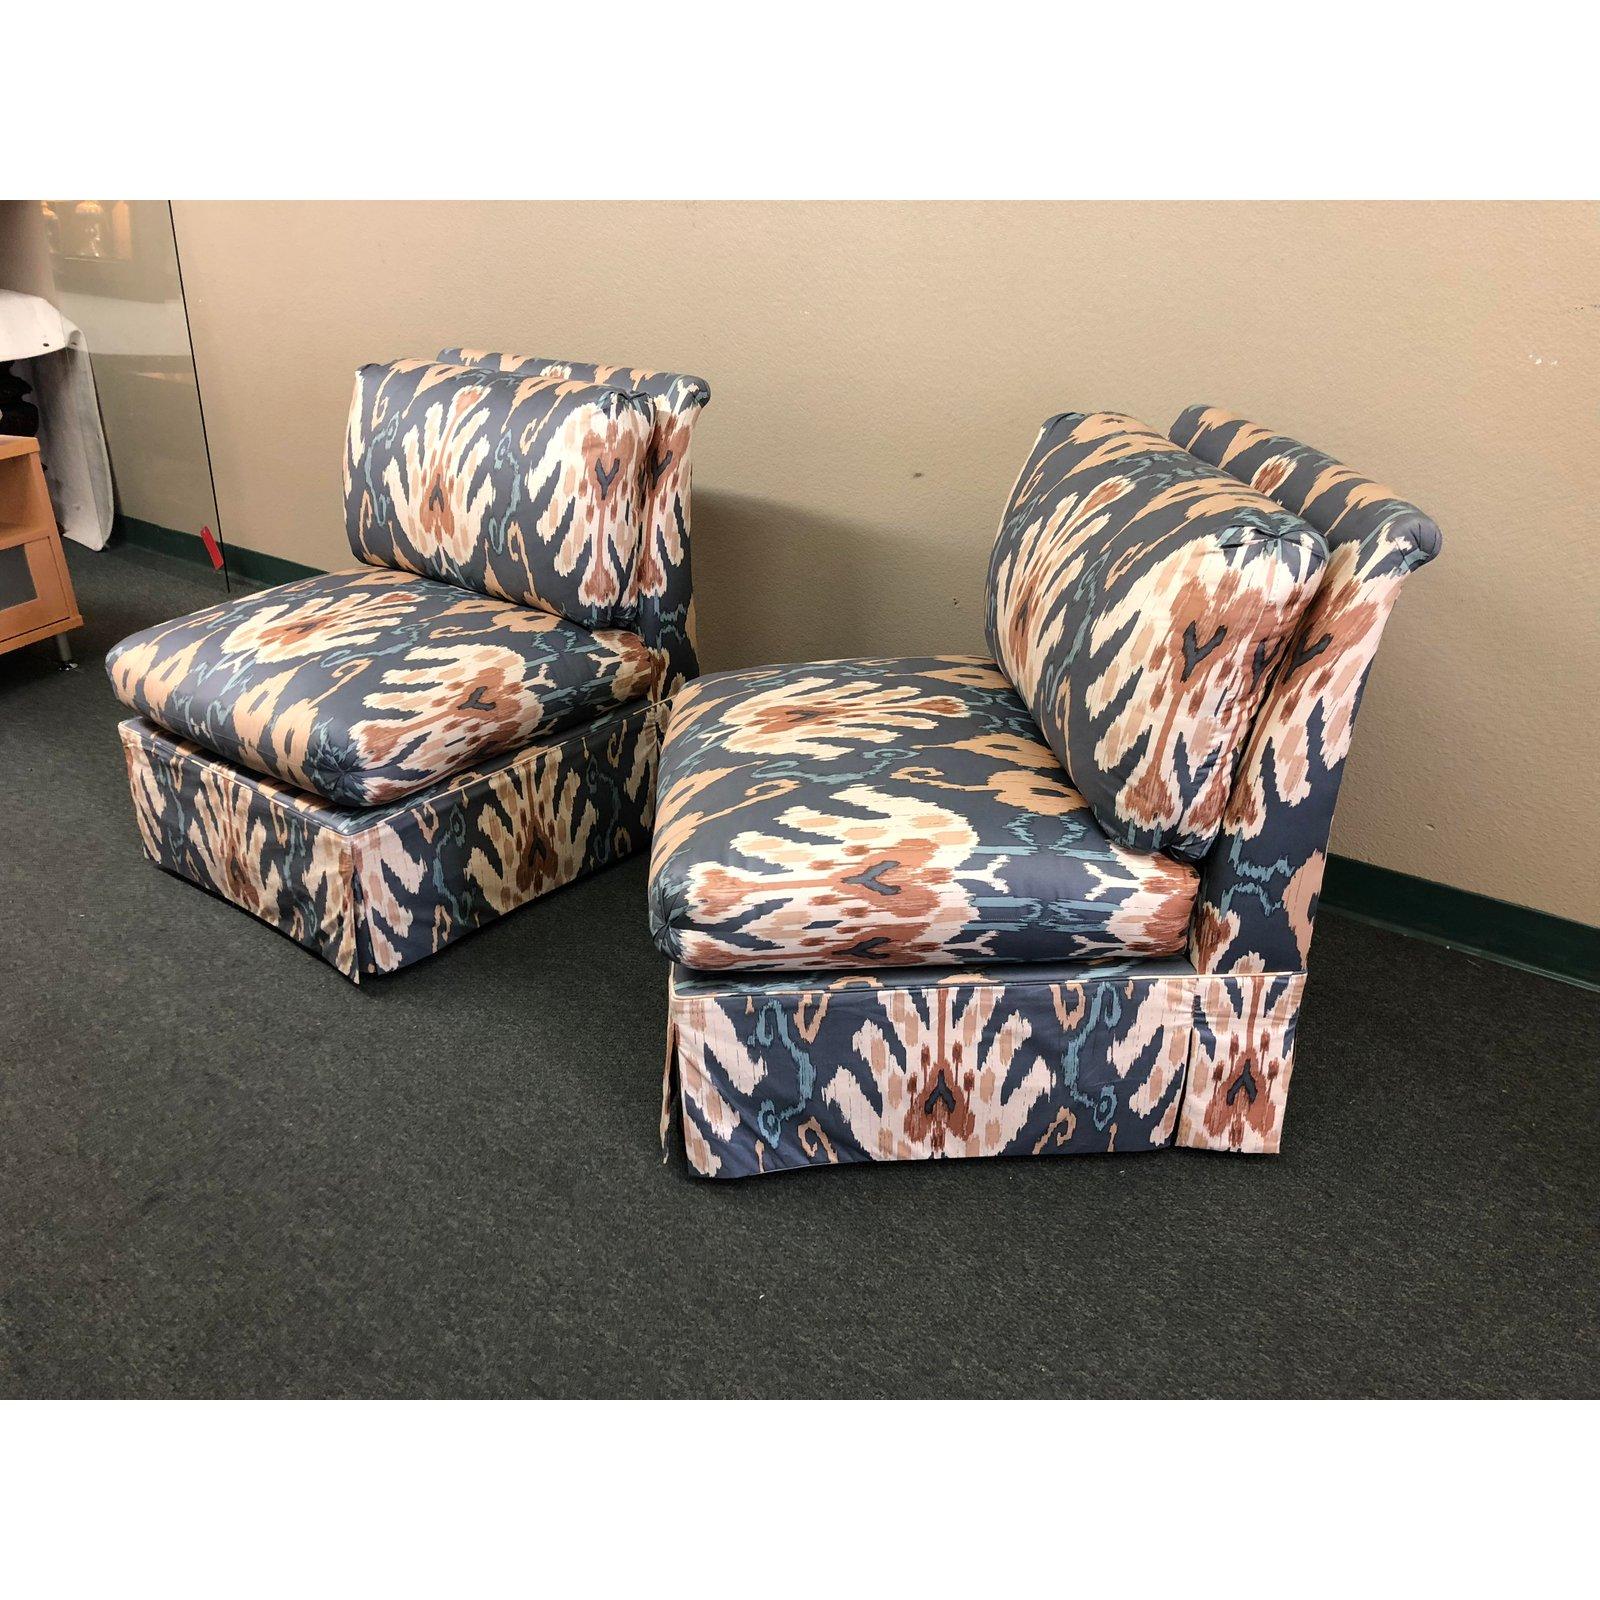 A pair of chintz upholstered chairs from Marge Carson, Rosemead CA. The chairs offer all the design, quality construction, attention to detail and upgraded fabric (Darjeeling Blue) one comes to expect from the company. Decor pillows are included.